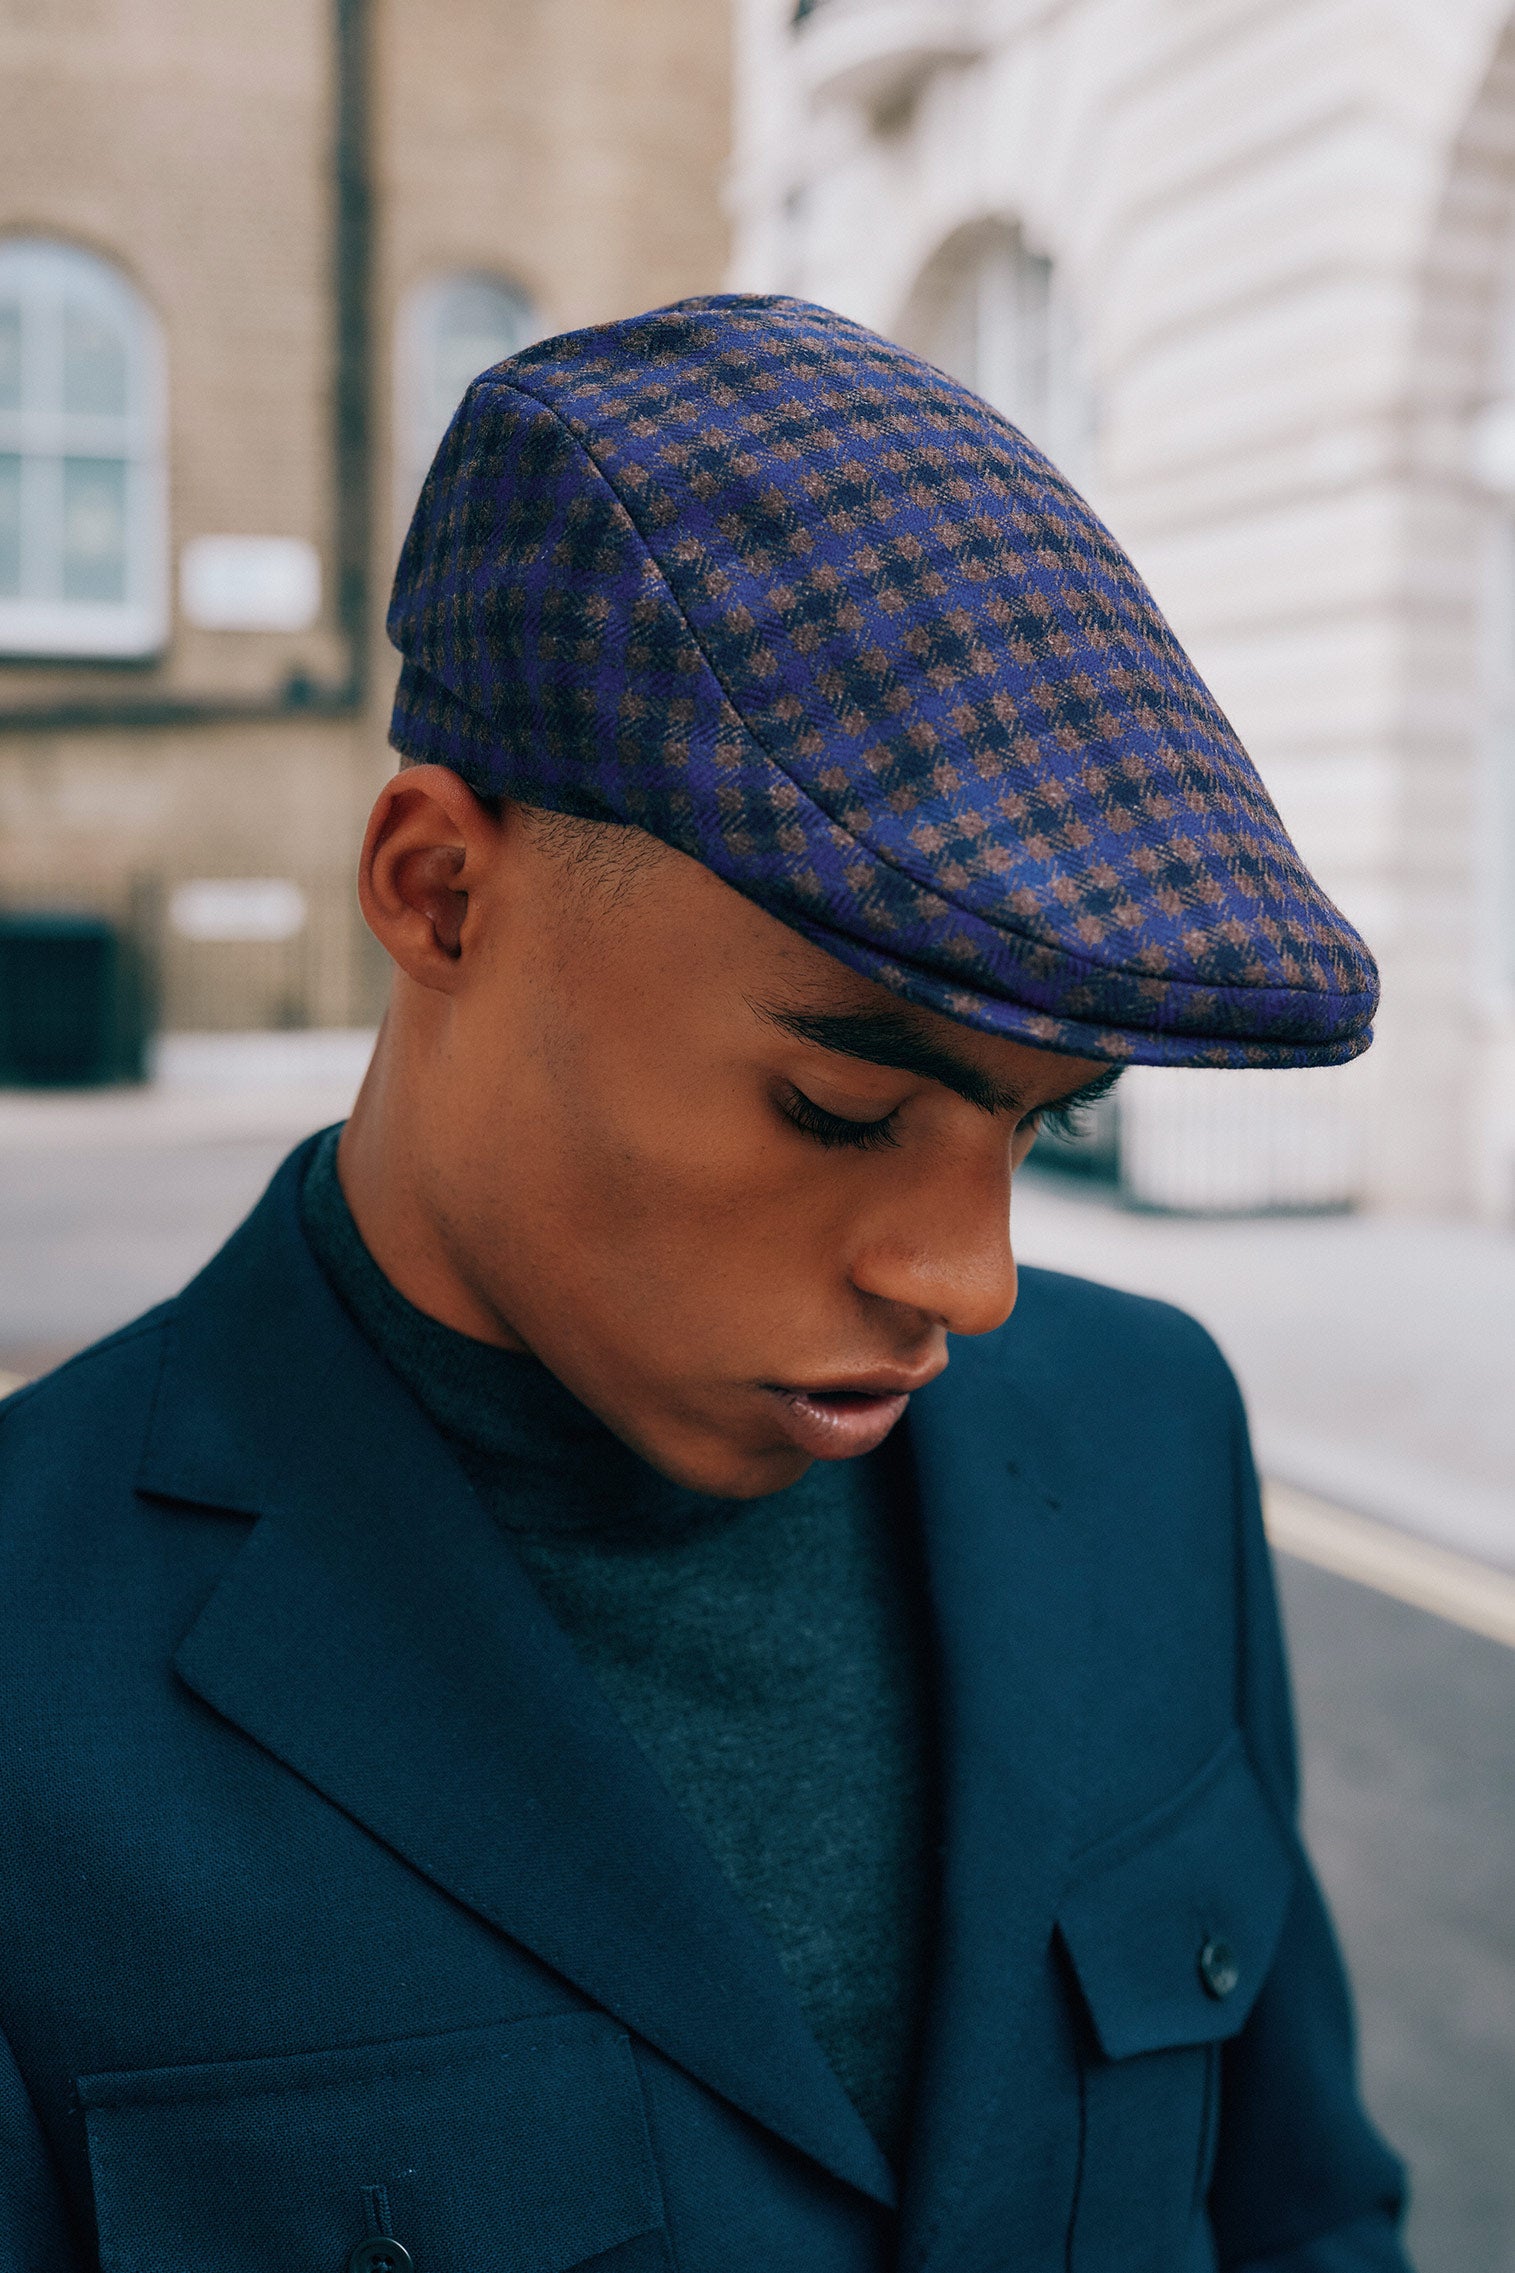 Grosvenor Check Flat Cap - Products - Lock & Co. Hatters London UK